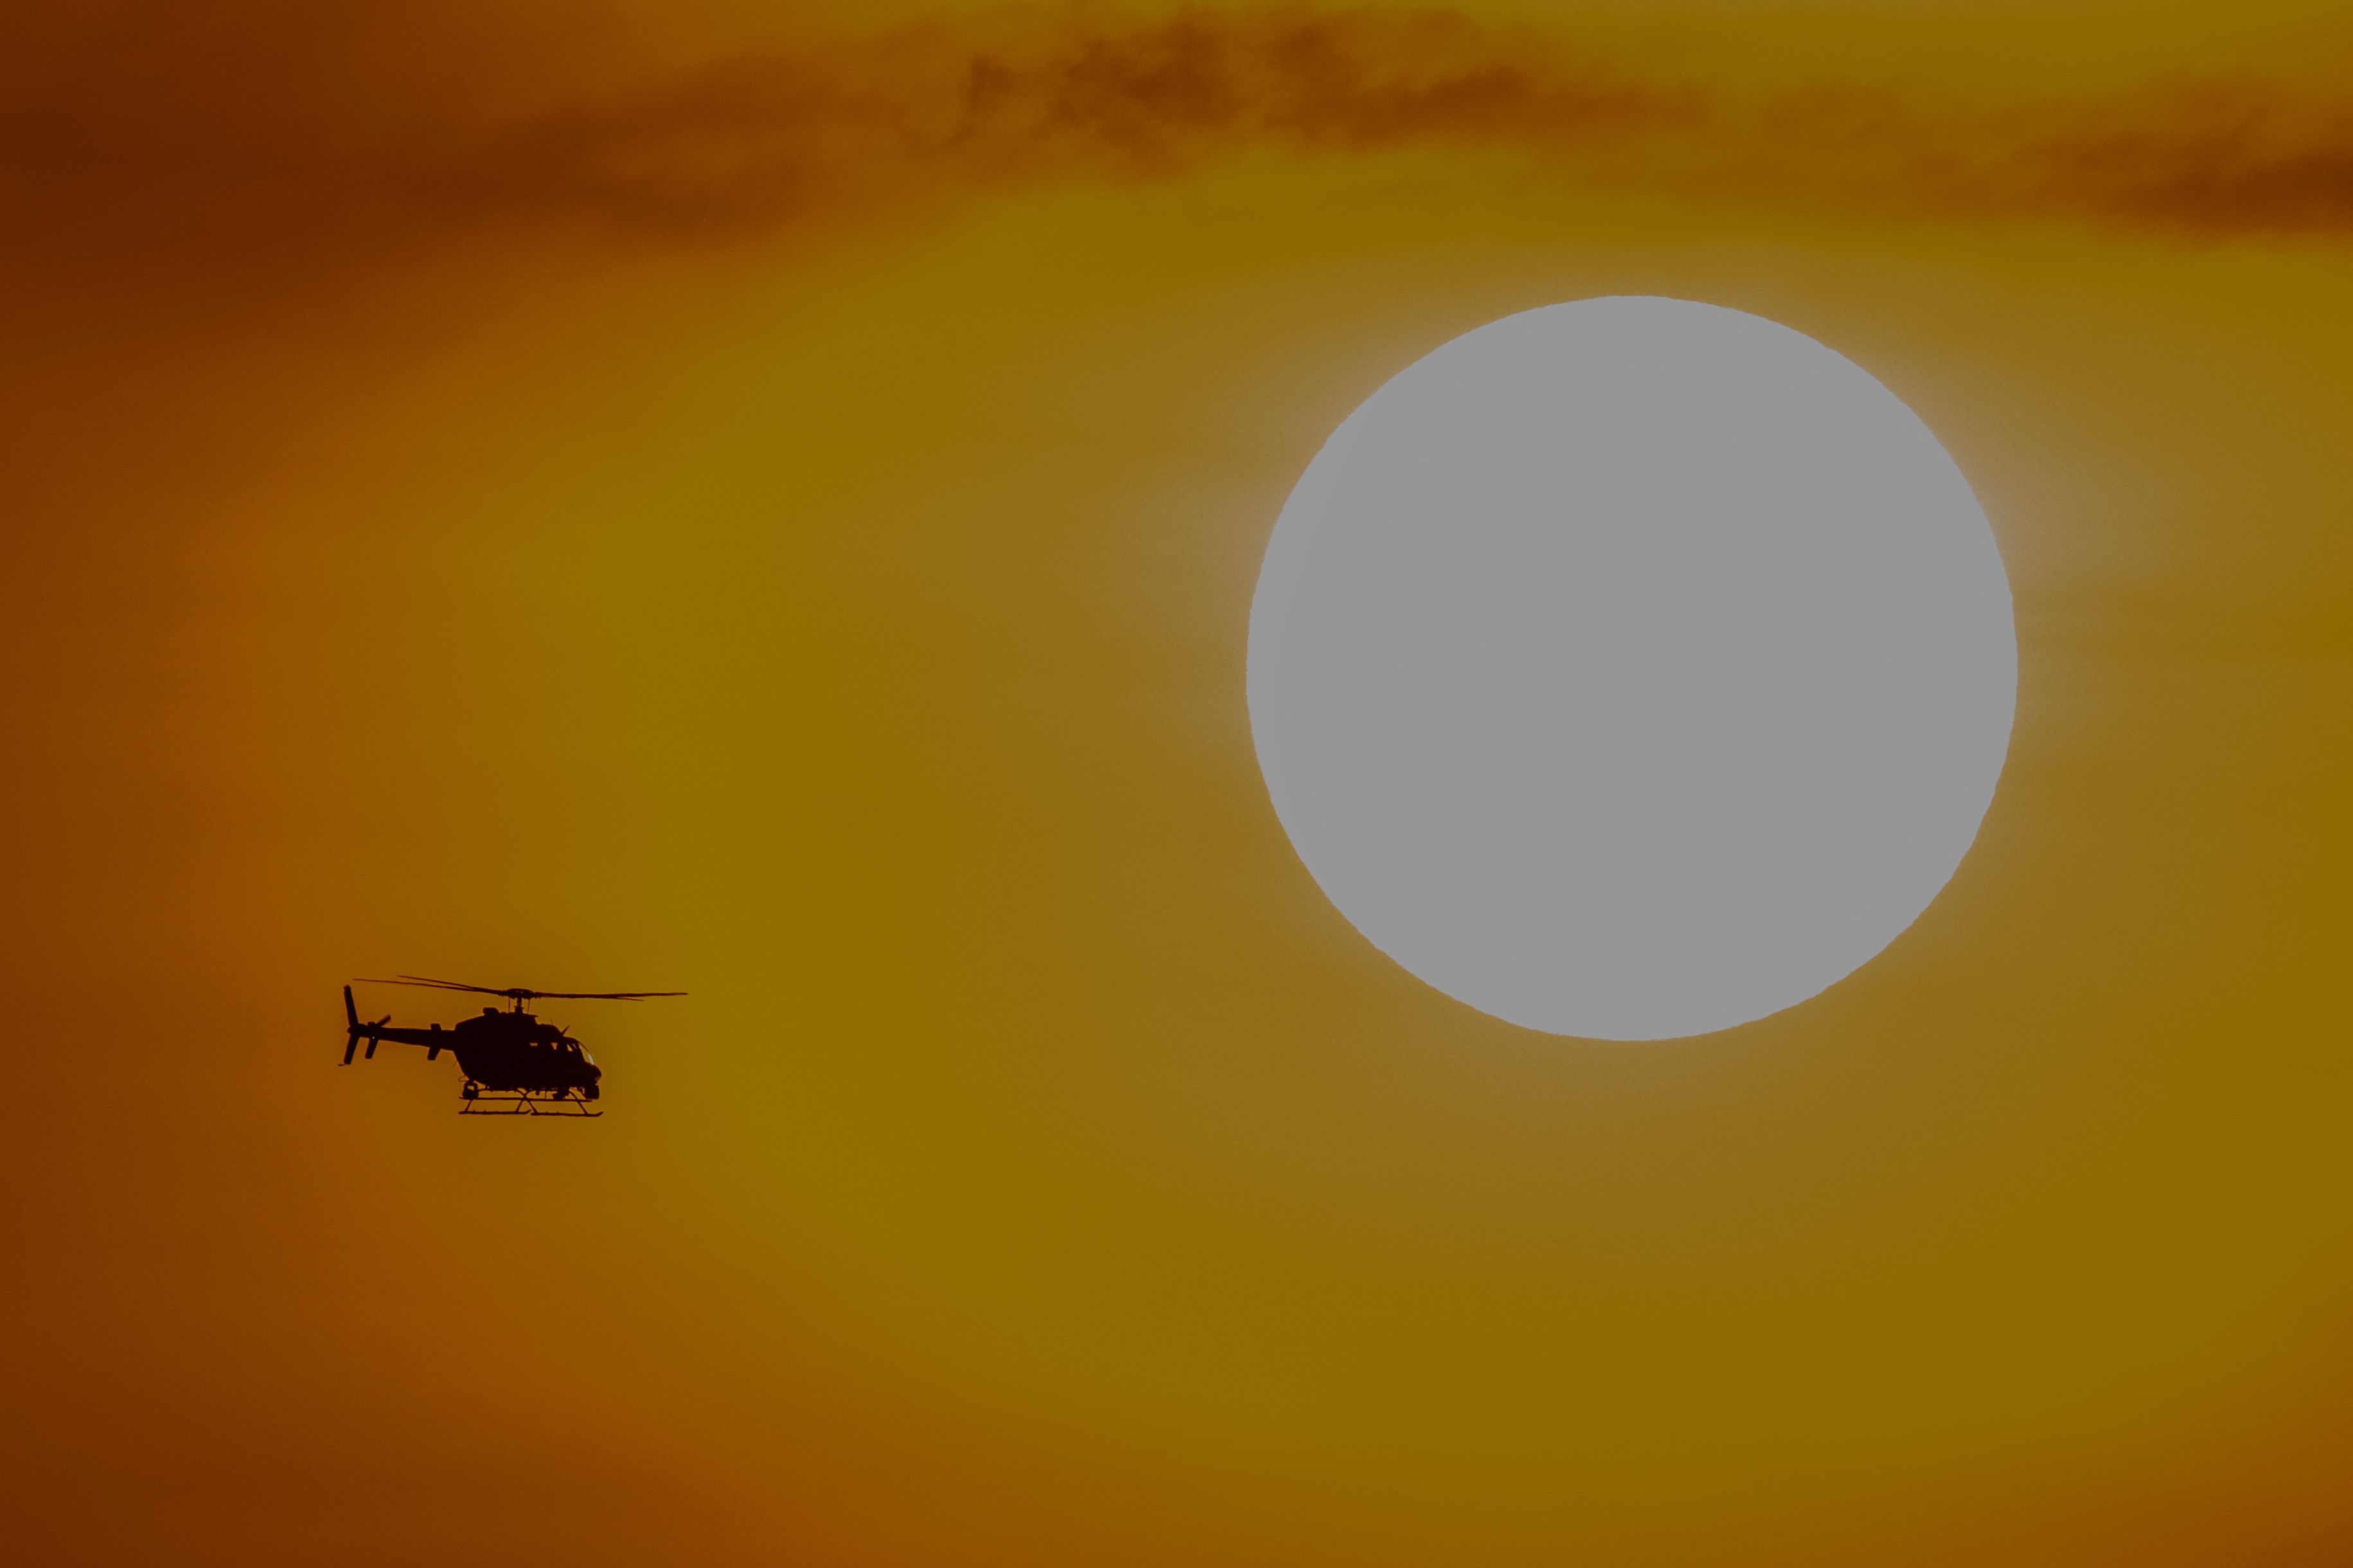 An extremely hazy photograph showing a heliocopter silhouette against a fiery sky. 